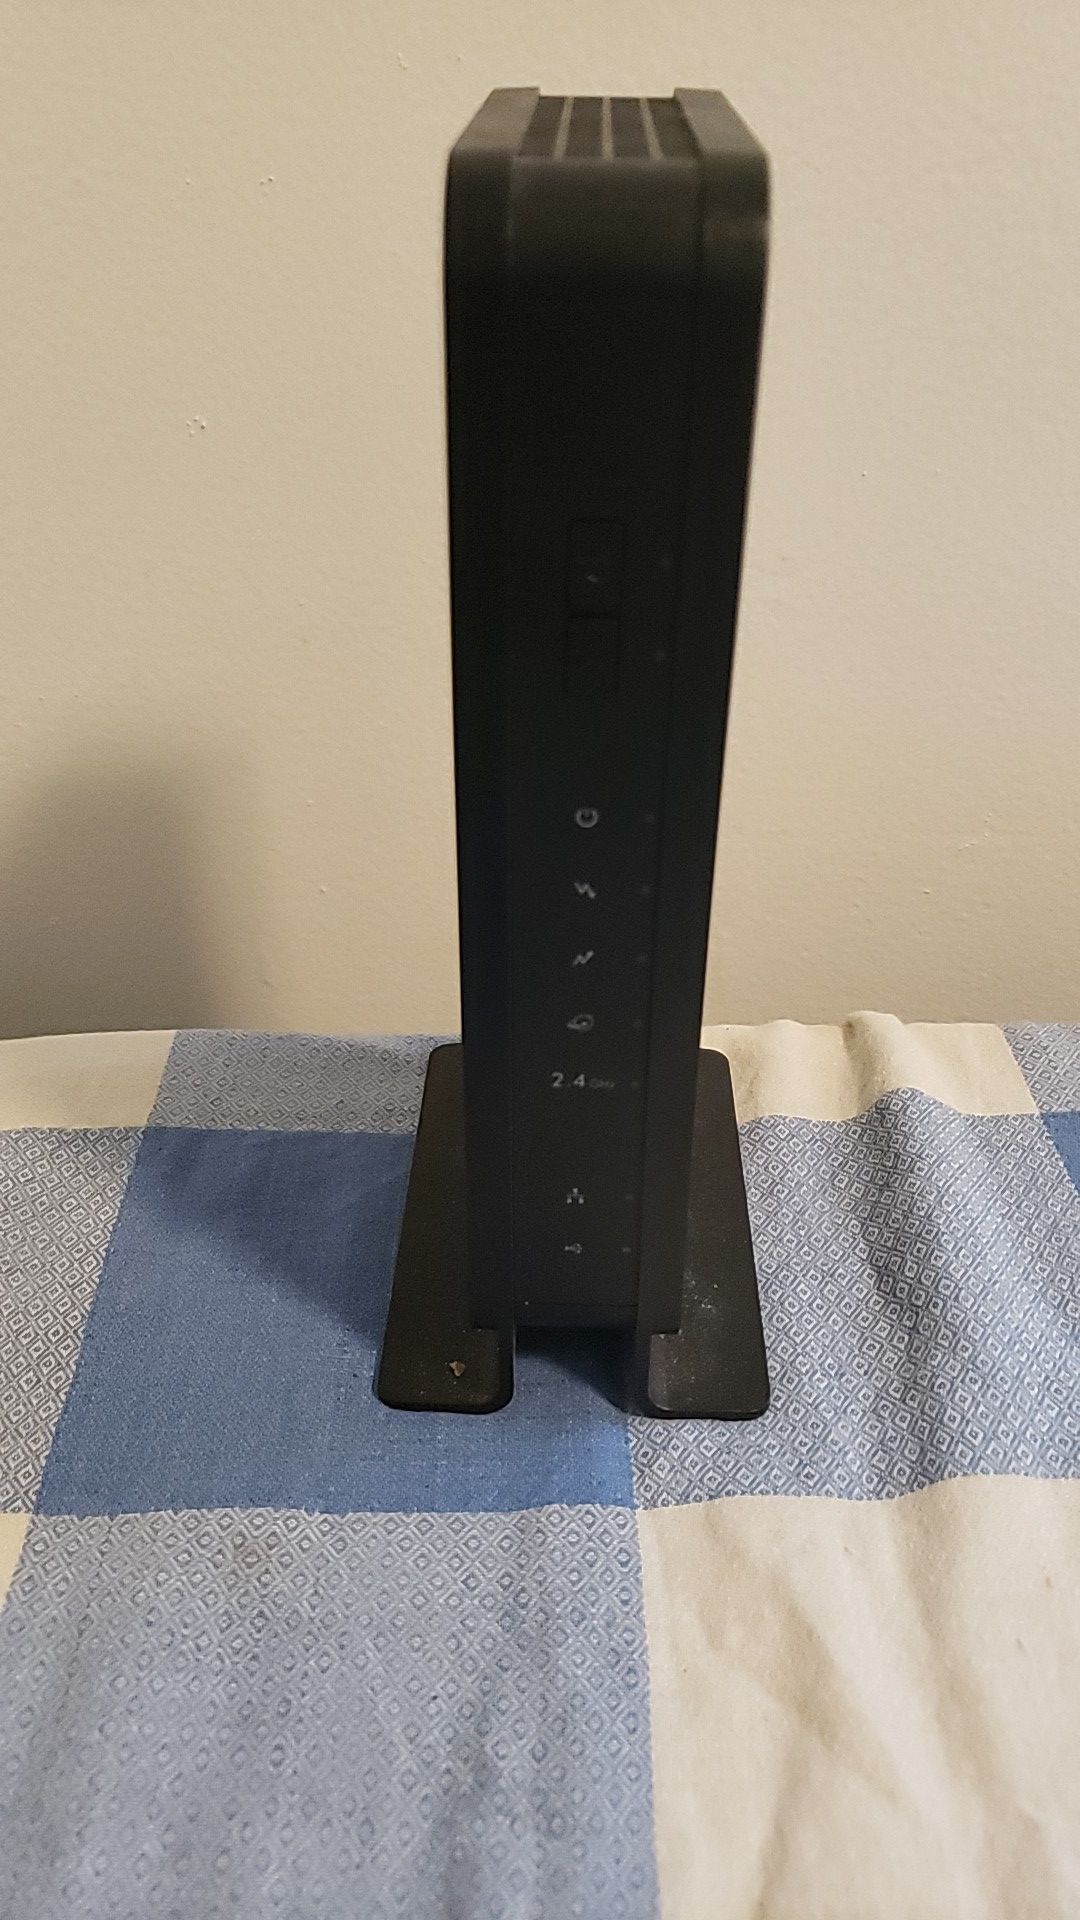 Netgear wifi modem and router for basic internet plan from Xfinity. Pick up only.